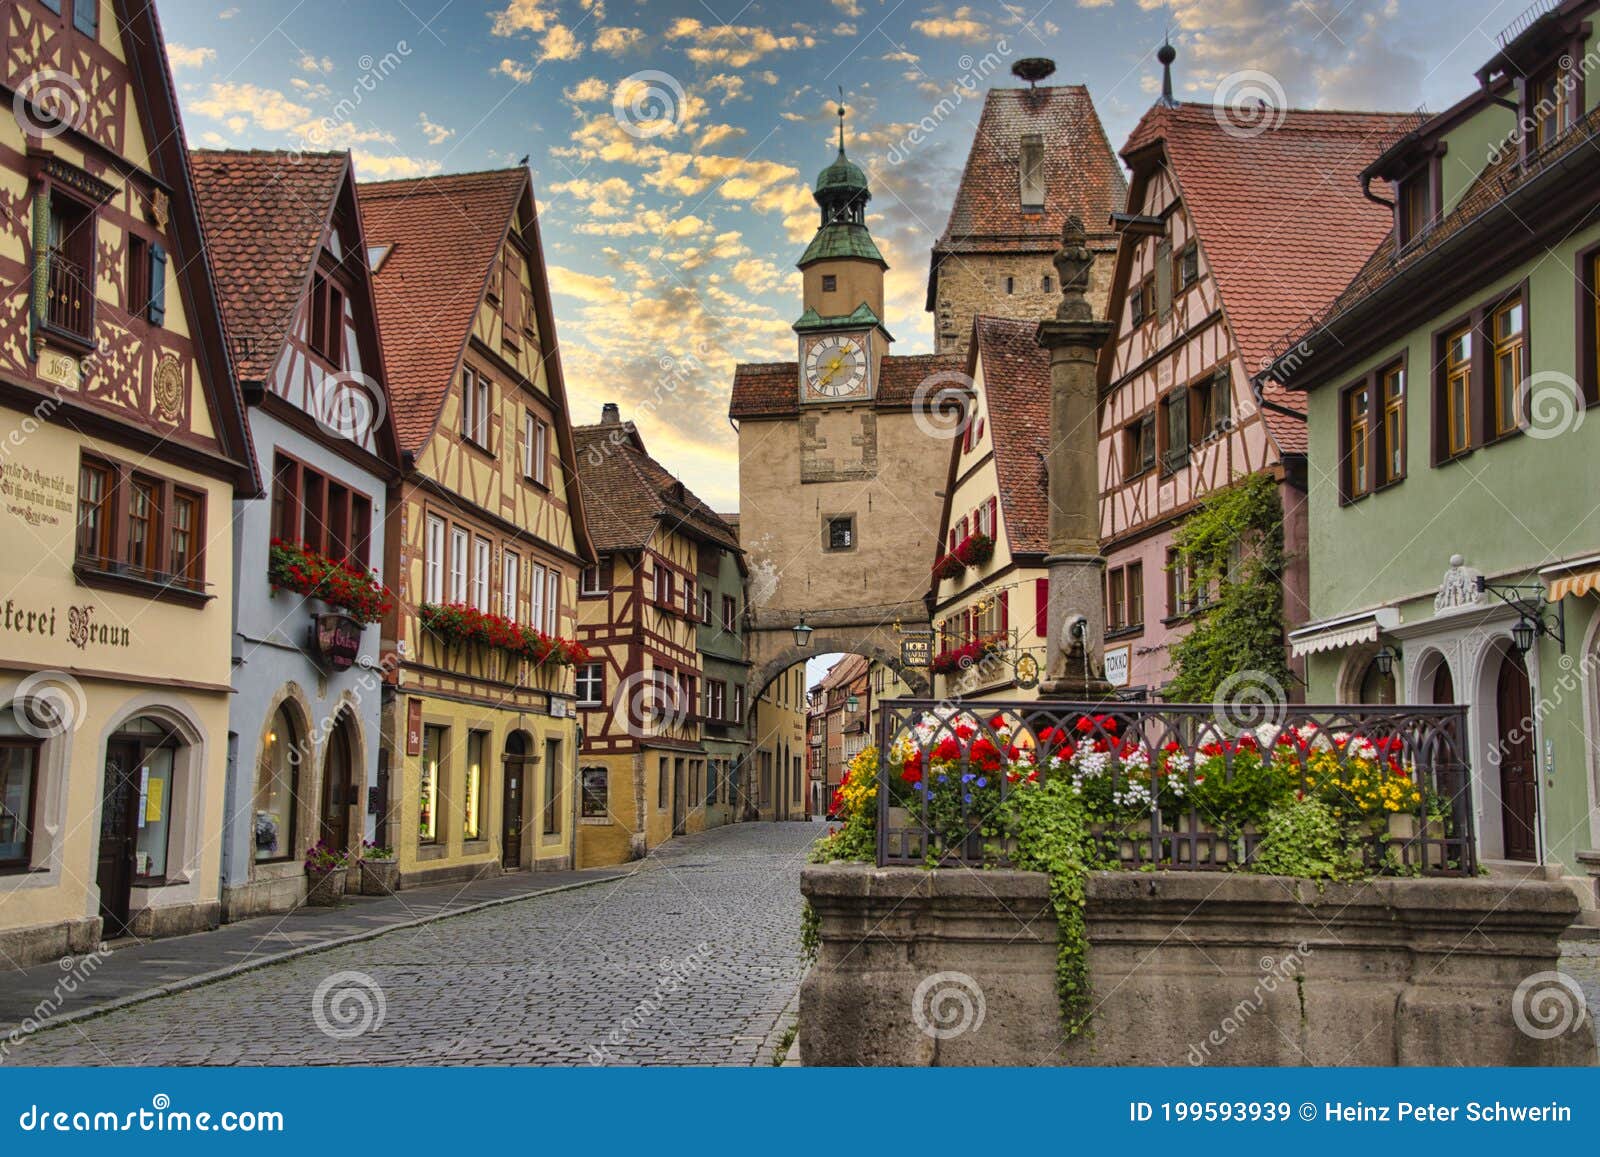 rothenburg ob der tauber a beautiful old small town